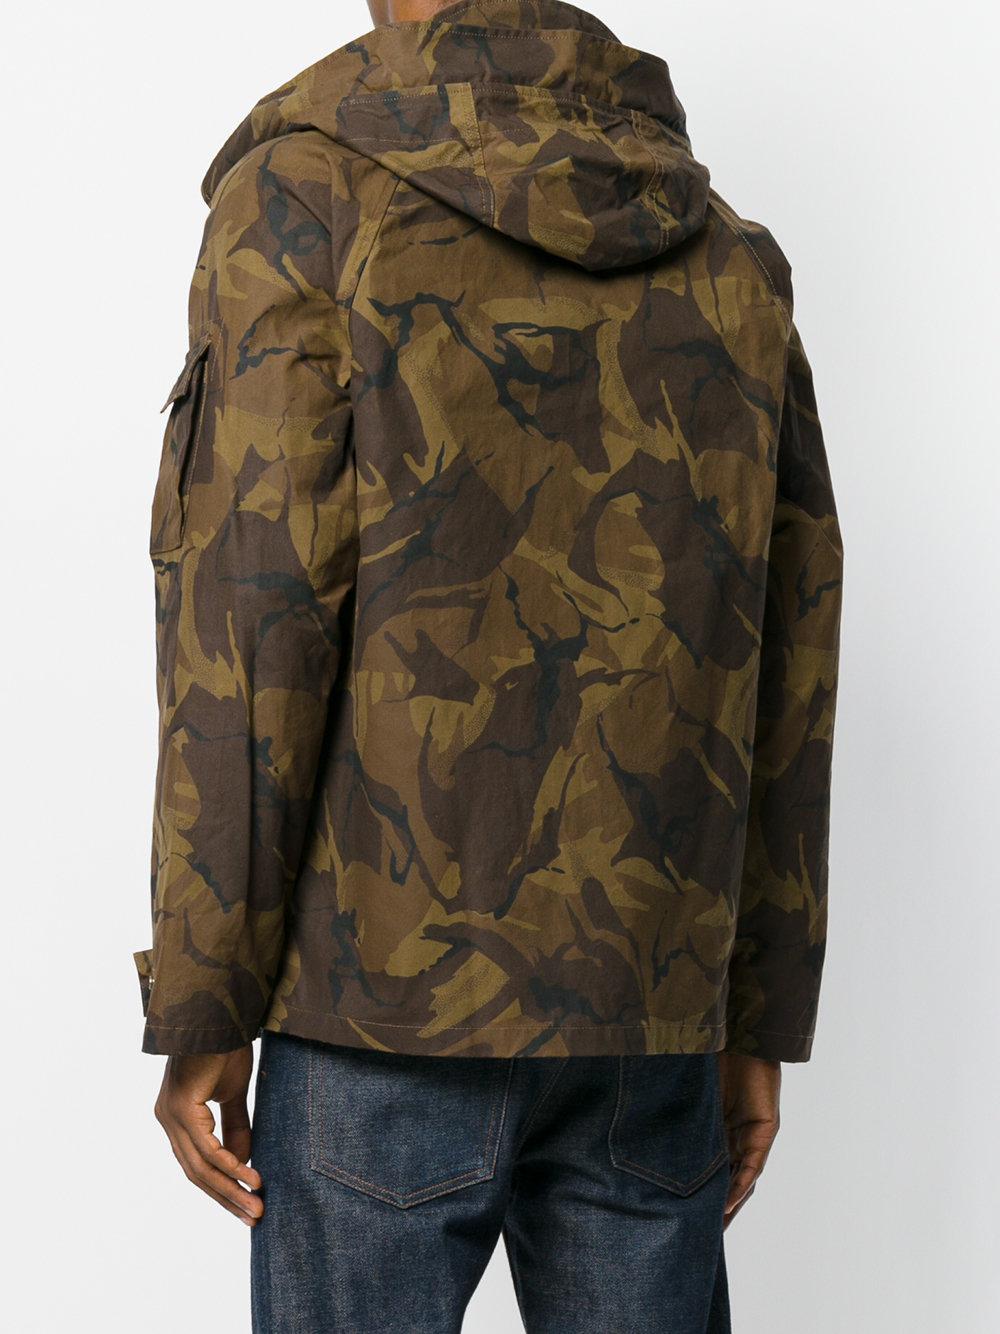 buy > cp company camouflage jacket, Up to 77% OFF